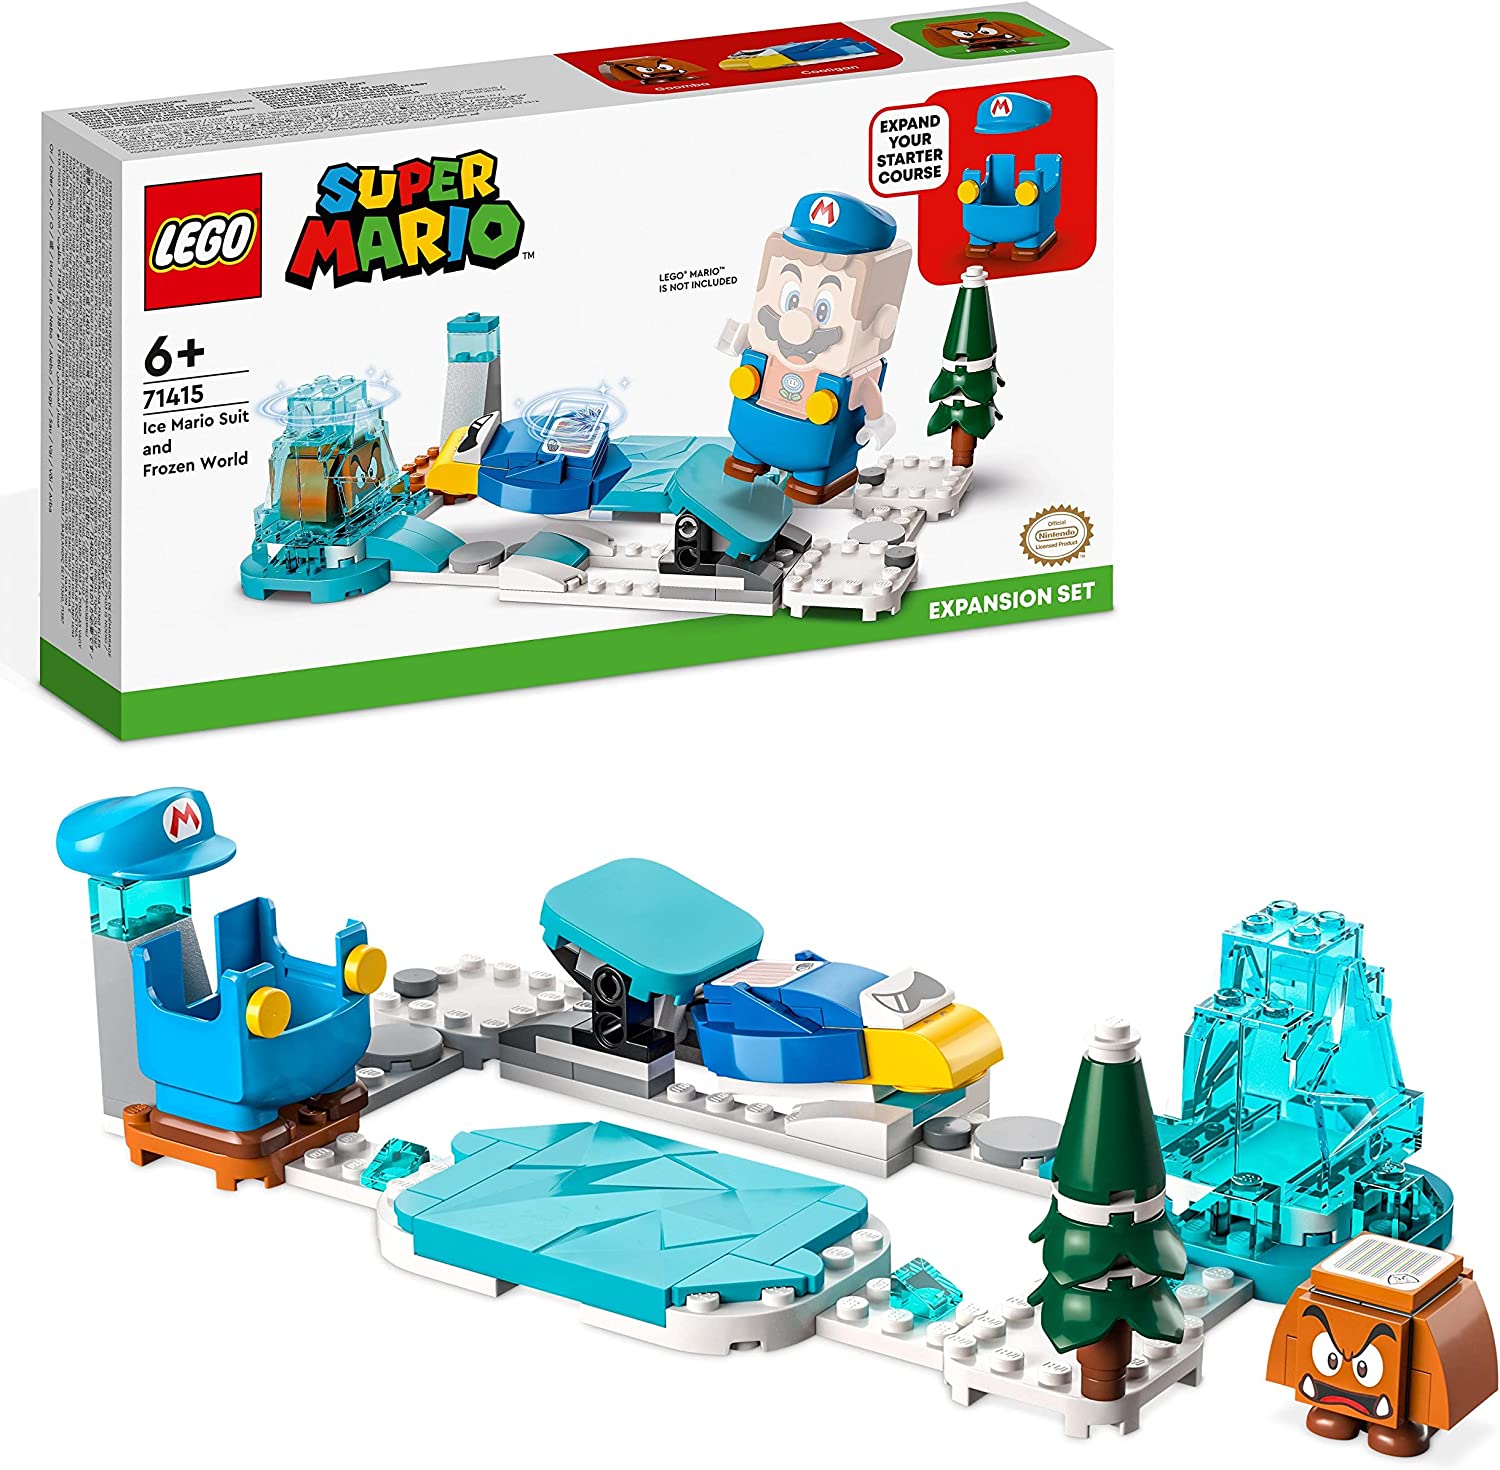 LEGO 71415 Super Mario ICE Mario Suit Expansion Set Collectable Toy with Figure Costume Plus Cooligan and Goomba Enemy Figures, Can be Combined with Starter Set